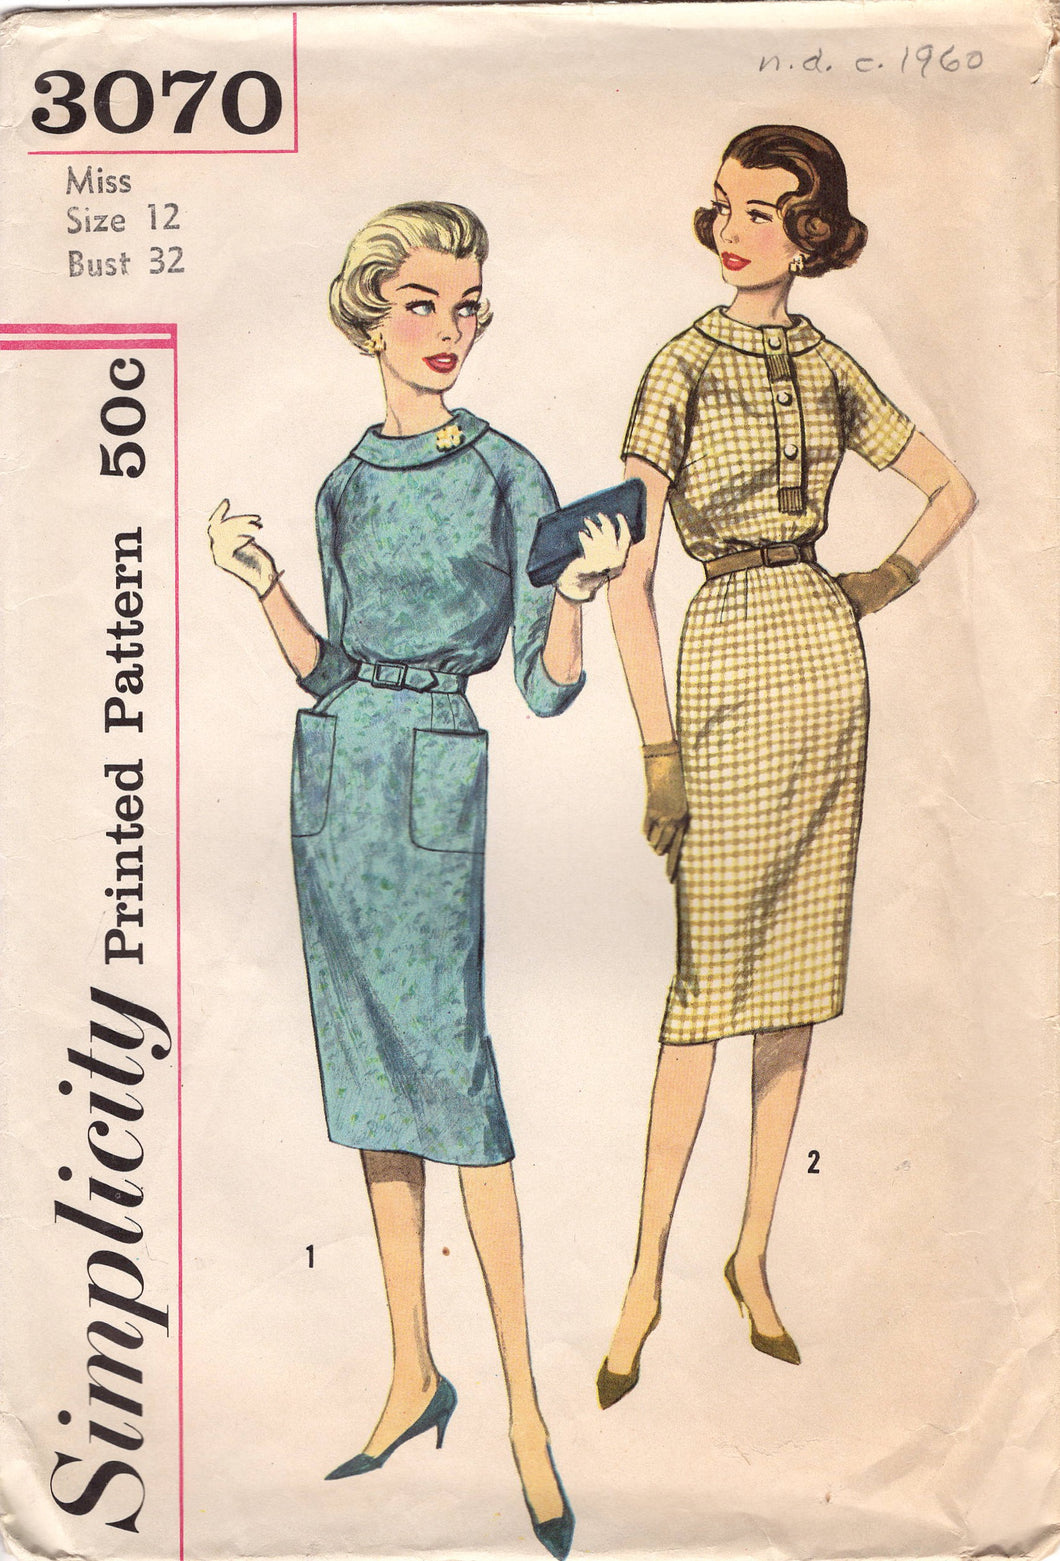 1950's Simplicity Sheath Dress Pattern with Rolled Collar and Raglan Sleeves - Bust 32